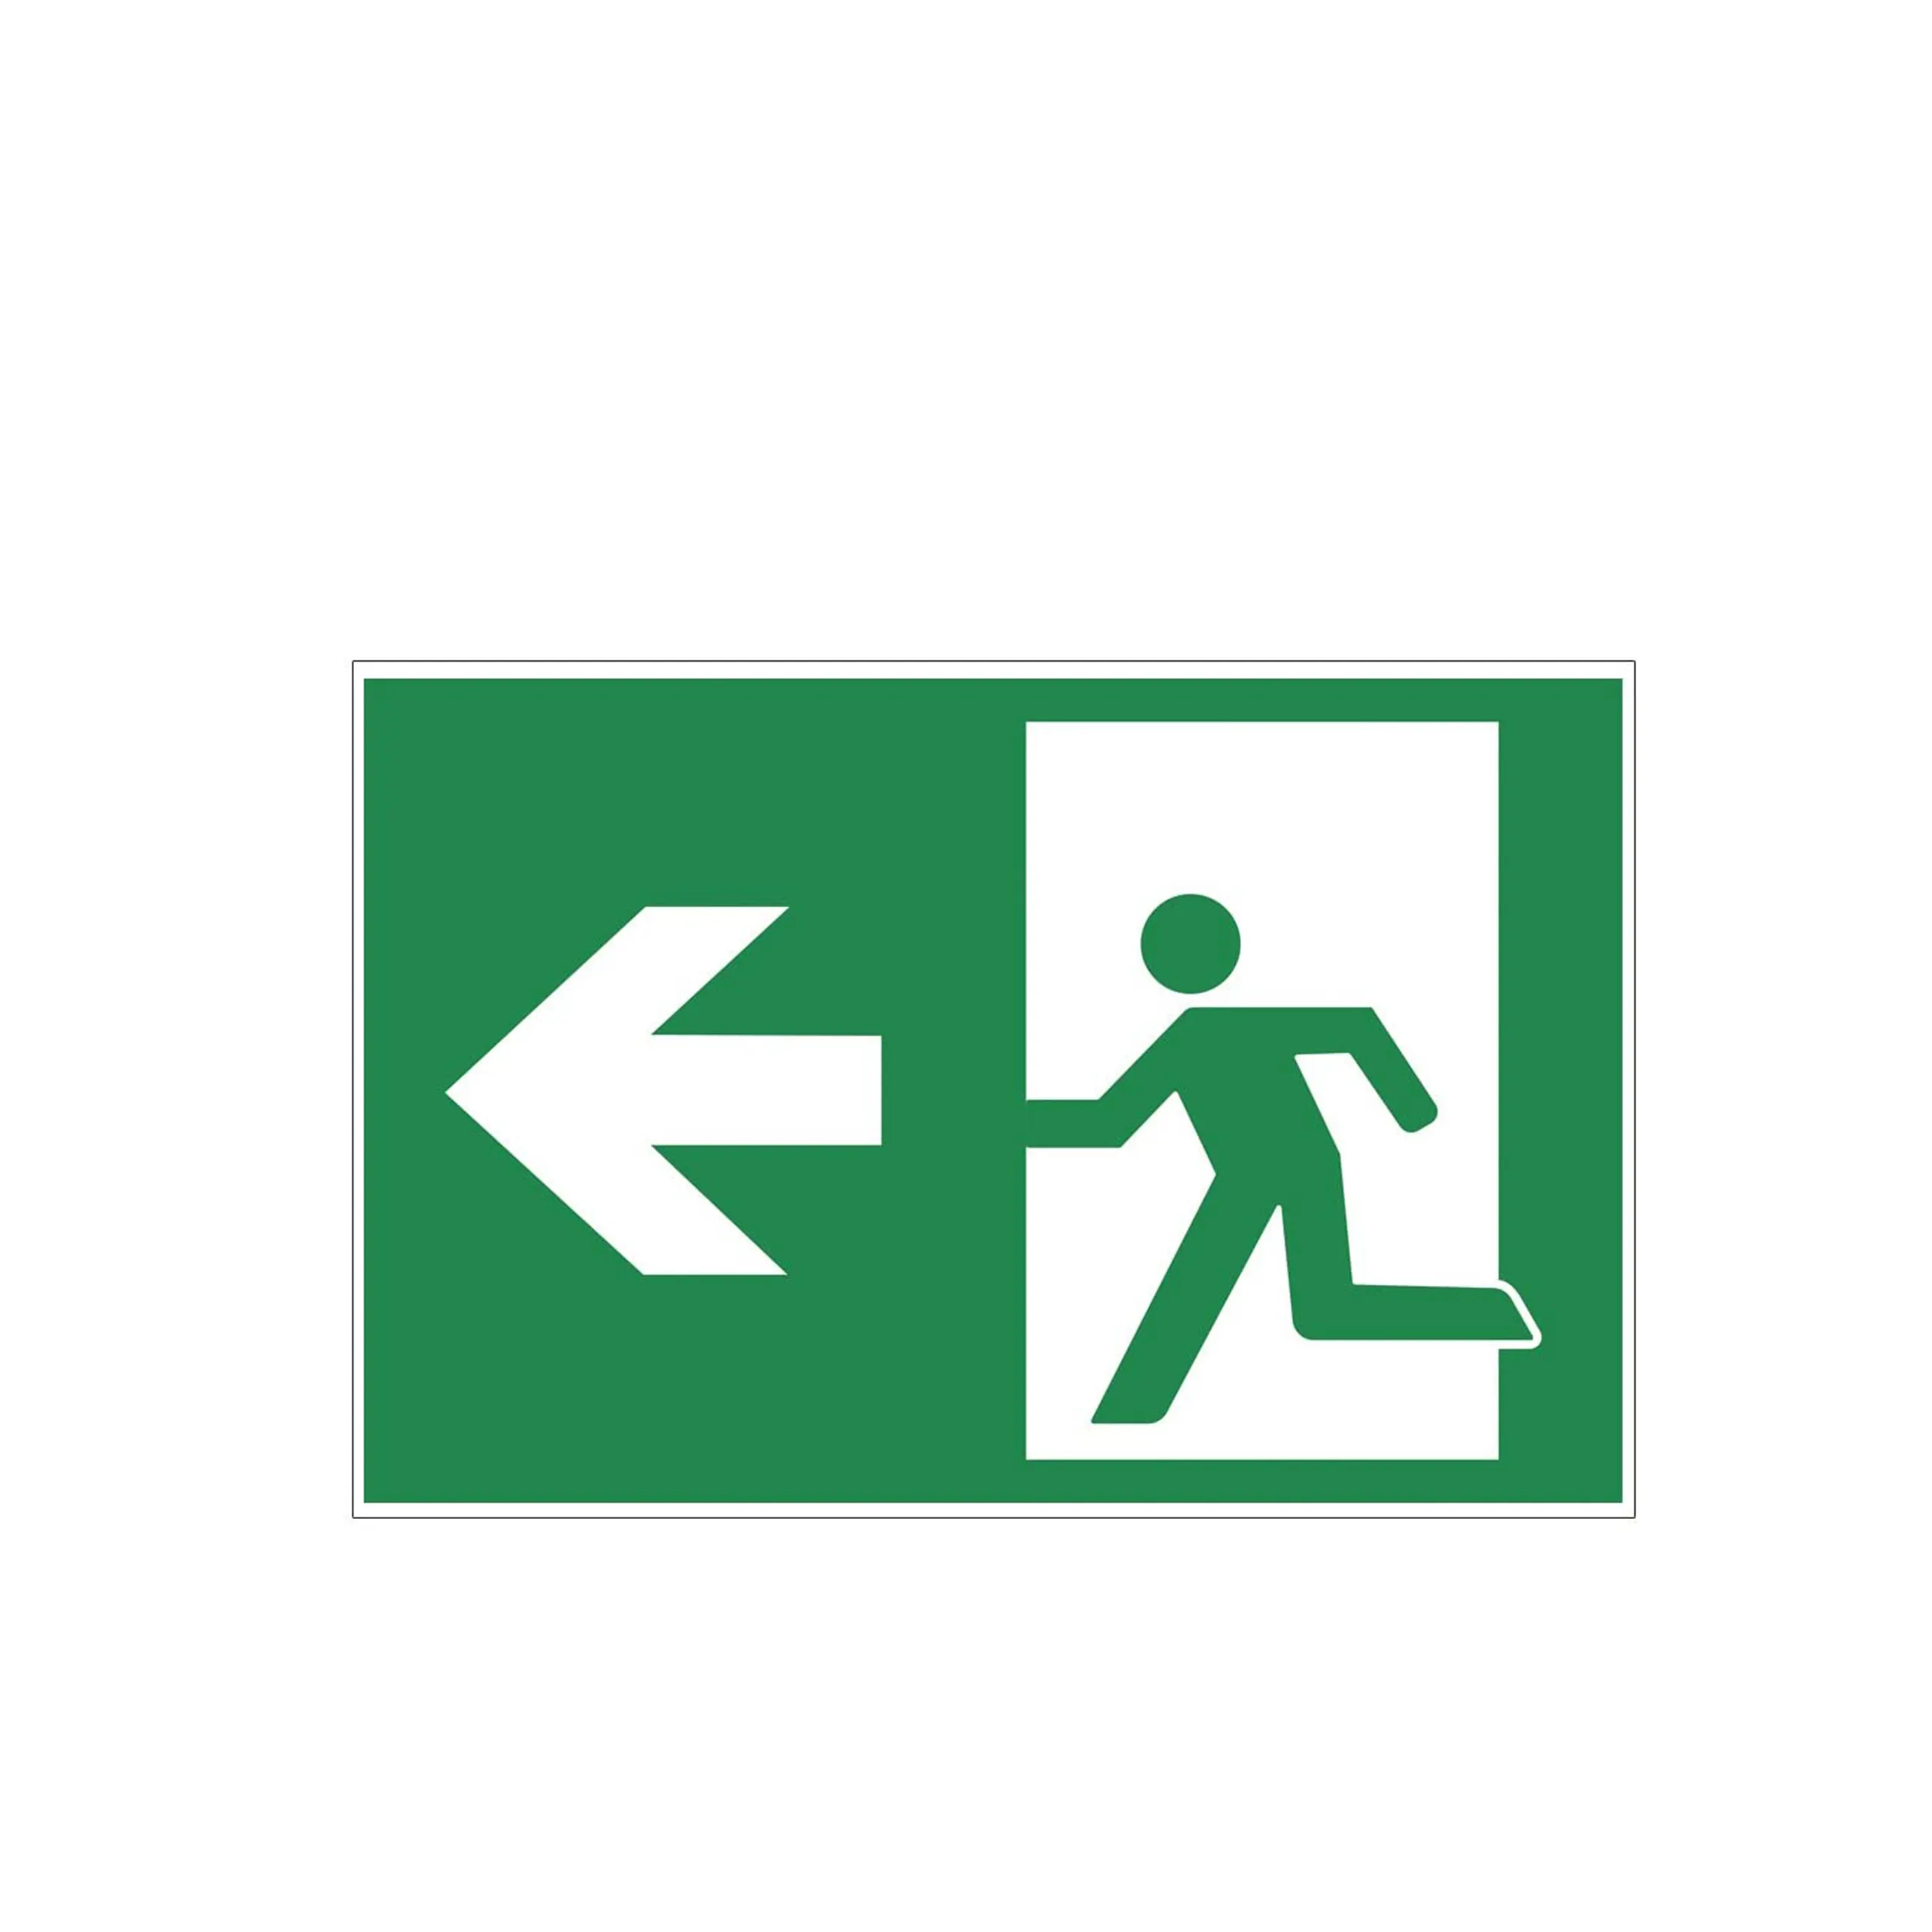 Emergency Exit Arrow Sign Sticker  Non-Toxic Tasteless Eco-Friendly Luminous Export Warning Signs